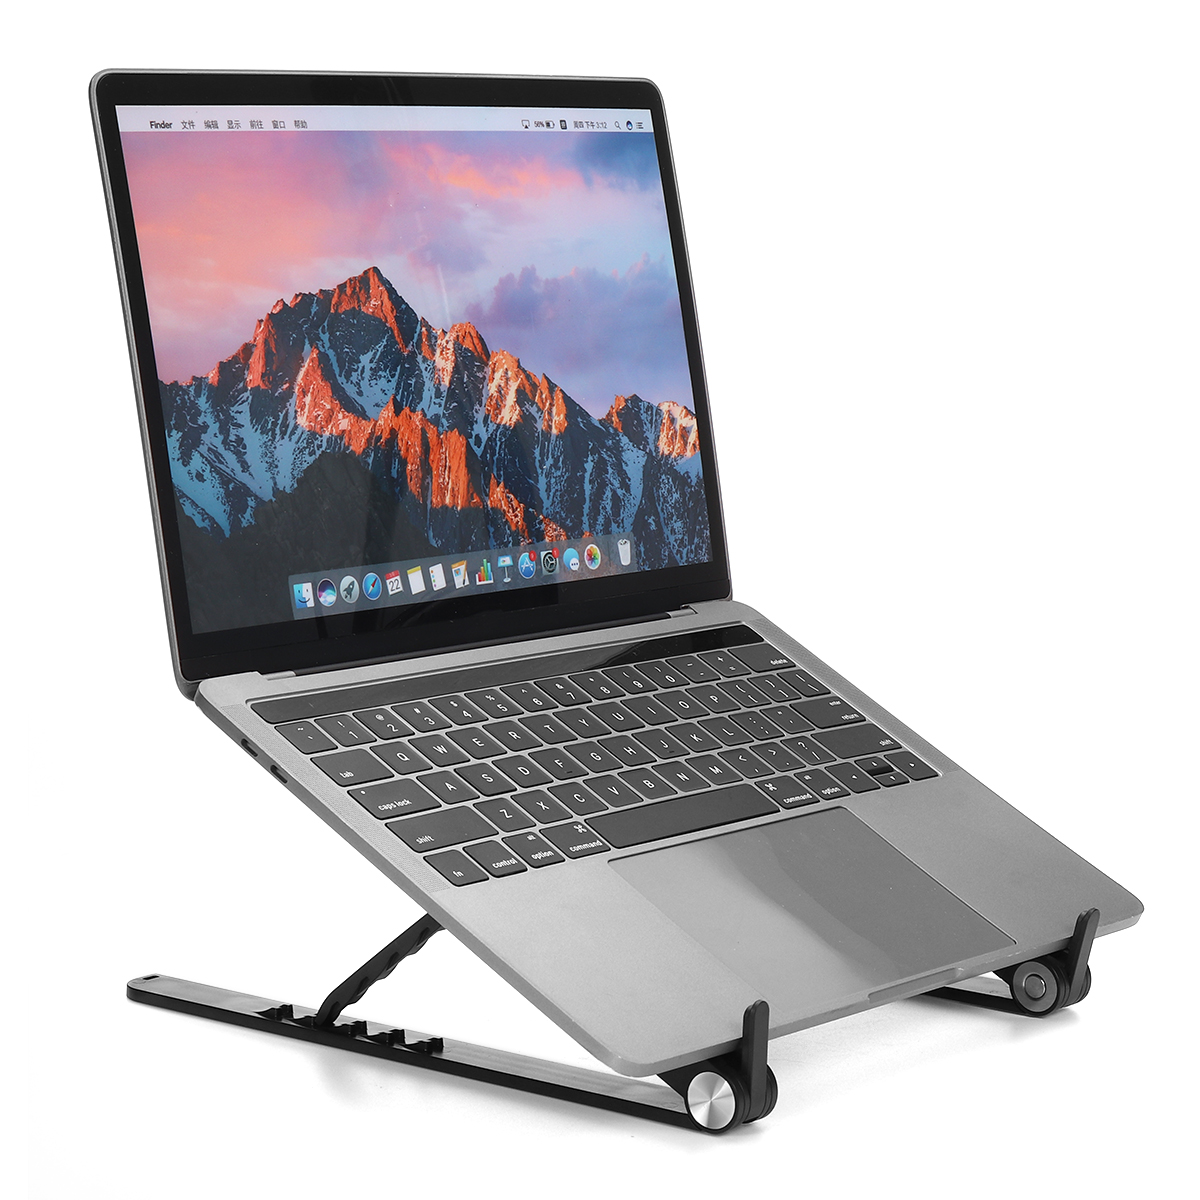 Foldable-5-Height-Adjustable-Laptop-Stand-Tablet-Stand-Heat-Dissipation-for-iPad-Macbook-below-17-in-1700967-9